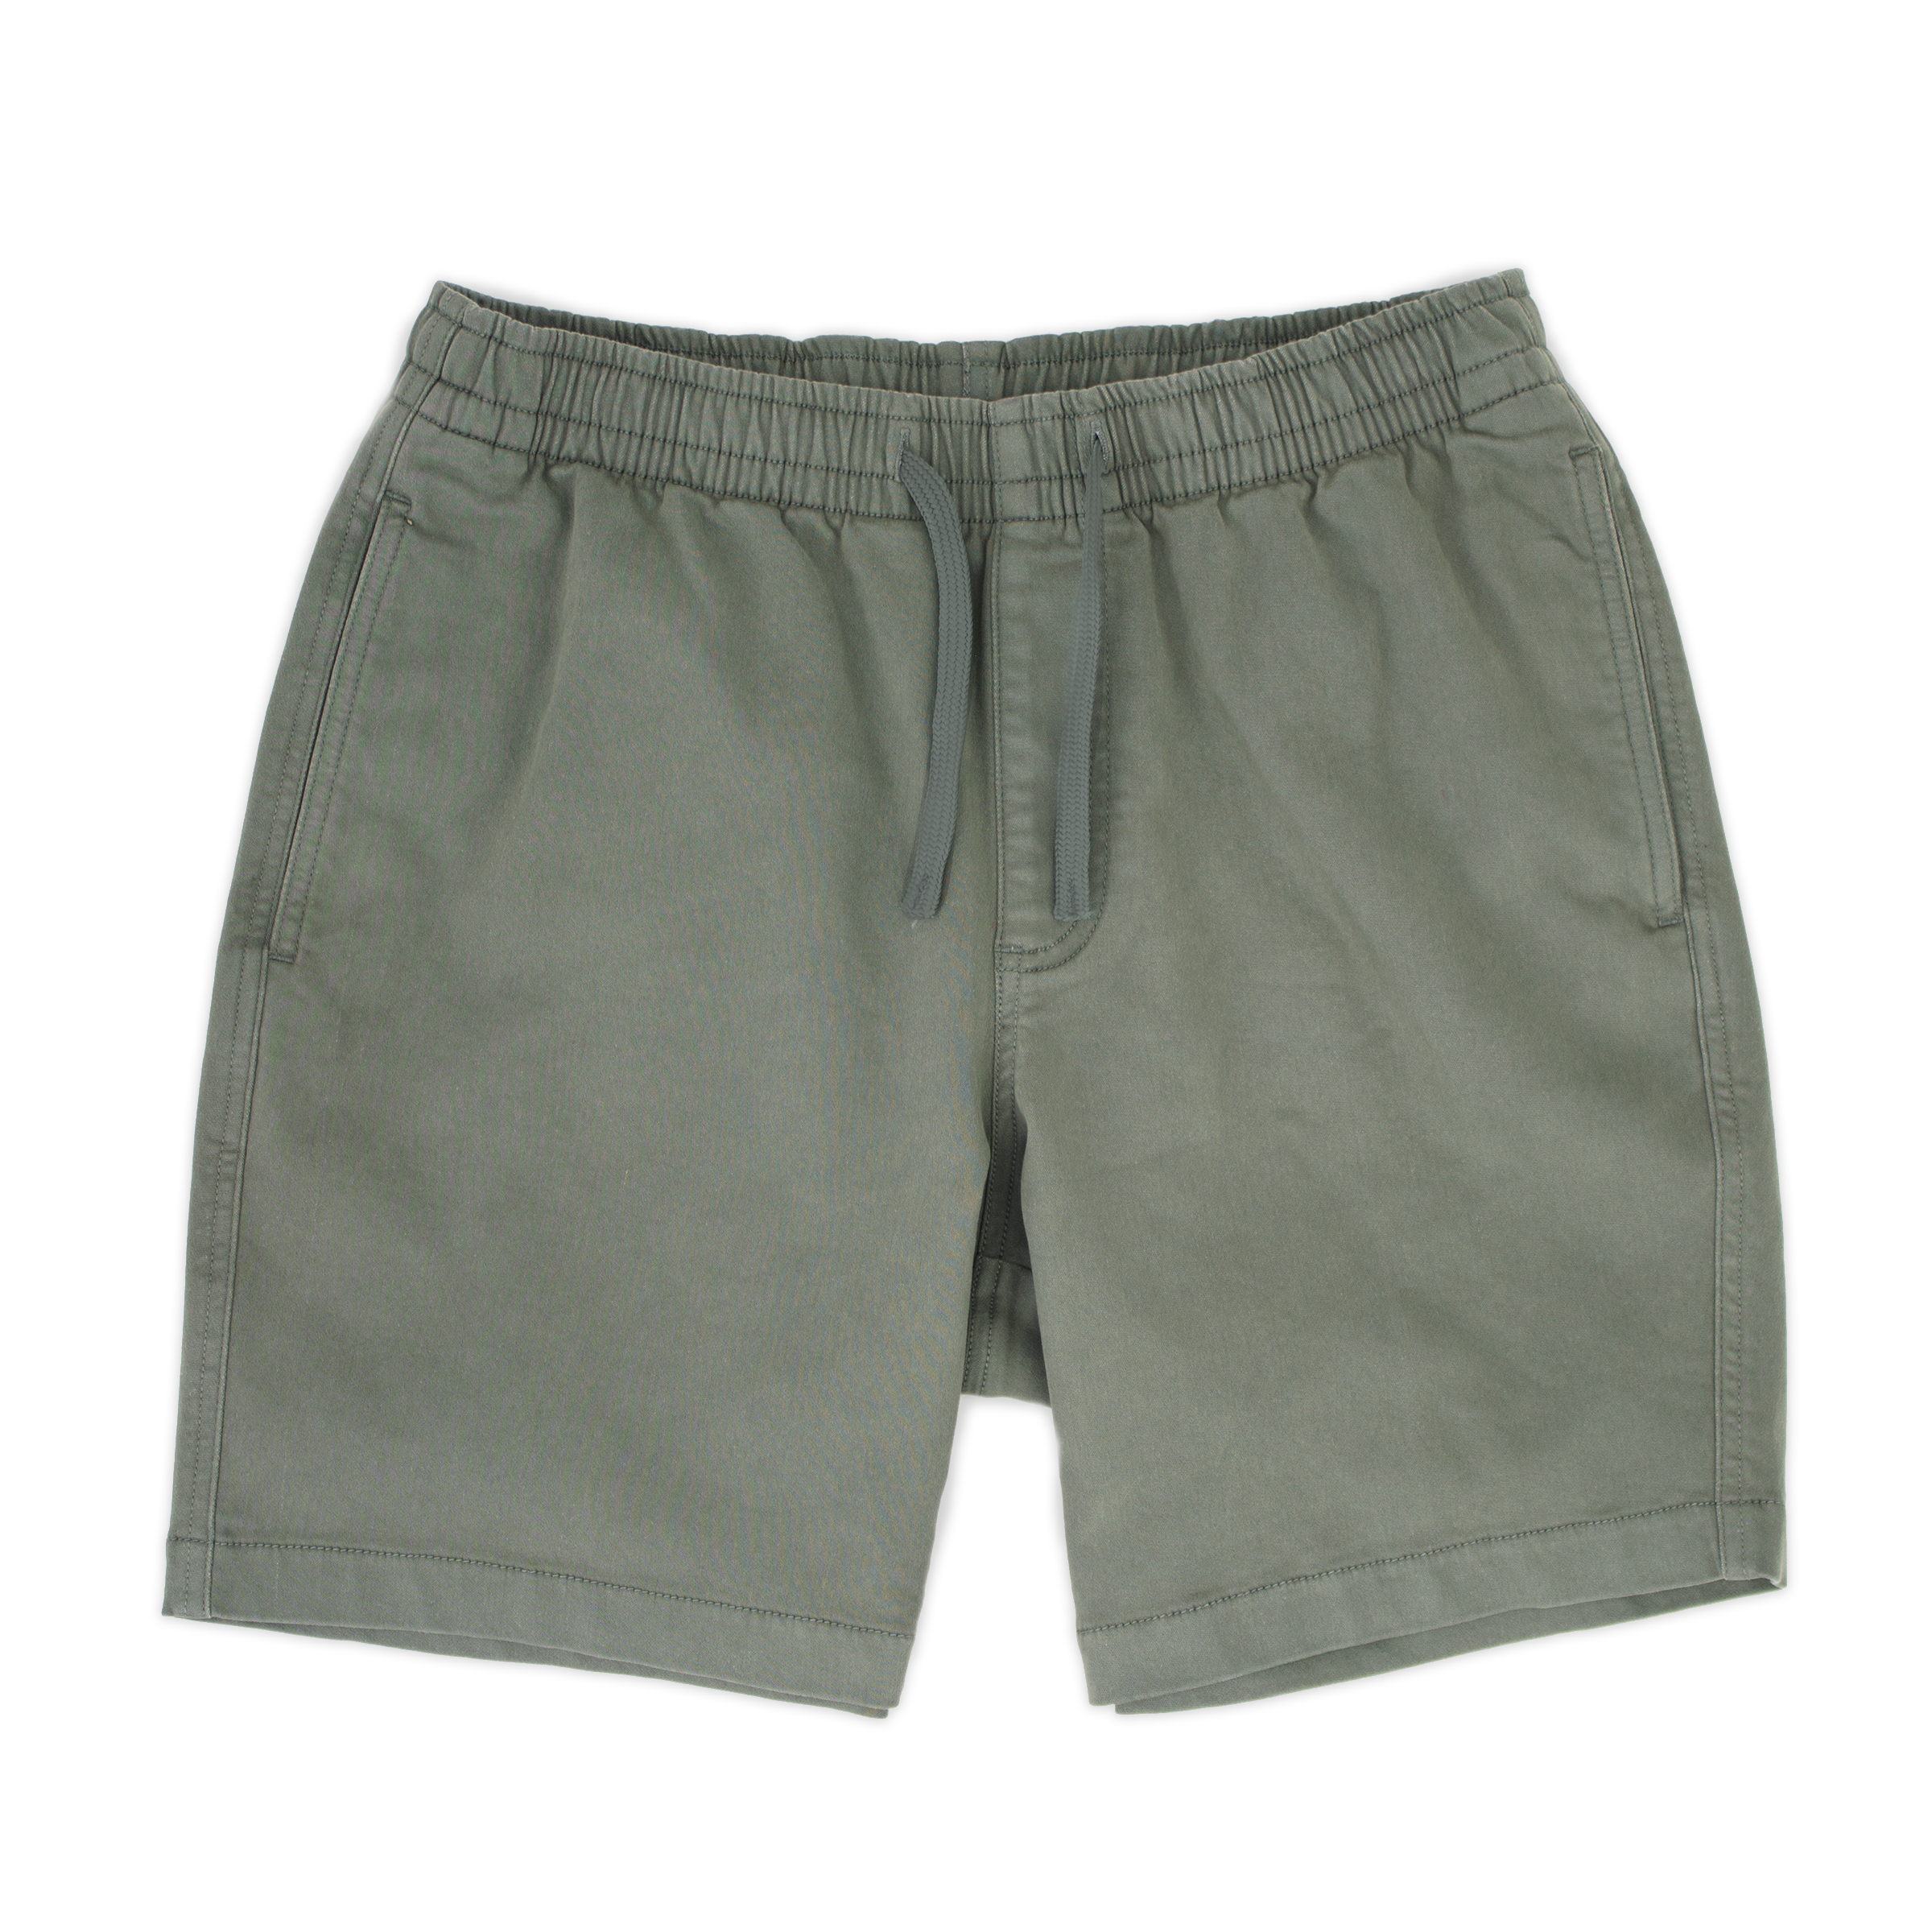 Alto Short 7" inseam in Grey front with elastic waistband, fabric drawstring, faux fly, and two front side seam pockets